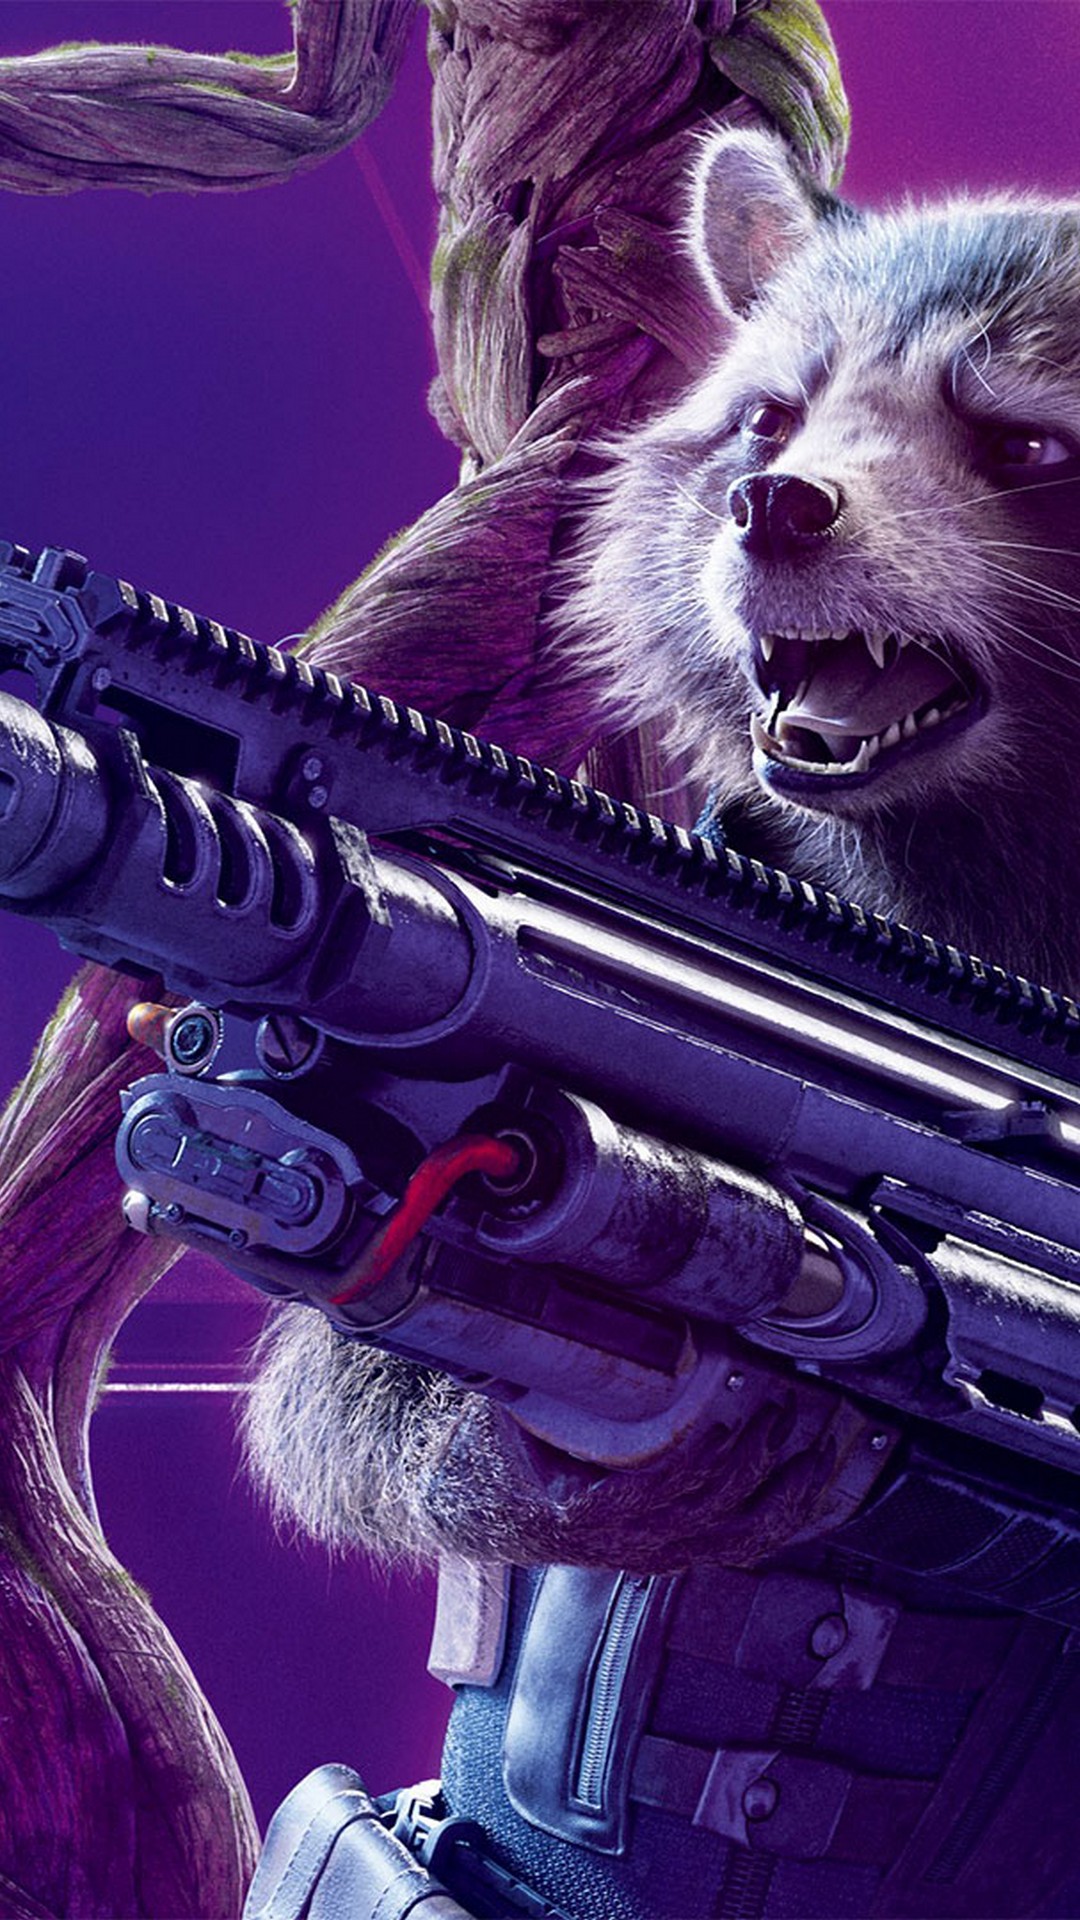 Rocket Raccoon Avengers Endgame iPhone Wallpaper with high-resolution 1080x1920 pixel. You can use this poster wallpaper for your Desktop Computers, Mac Screensavers, Windows Backgrounds, iPhone Wallpapers, Tablet or Android Lock screen and another Mobile device